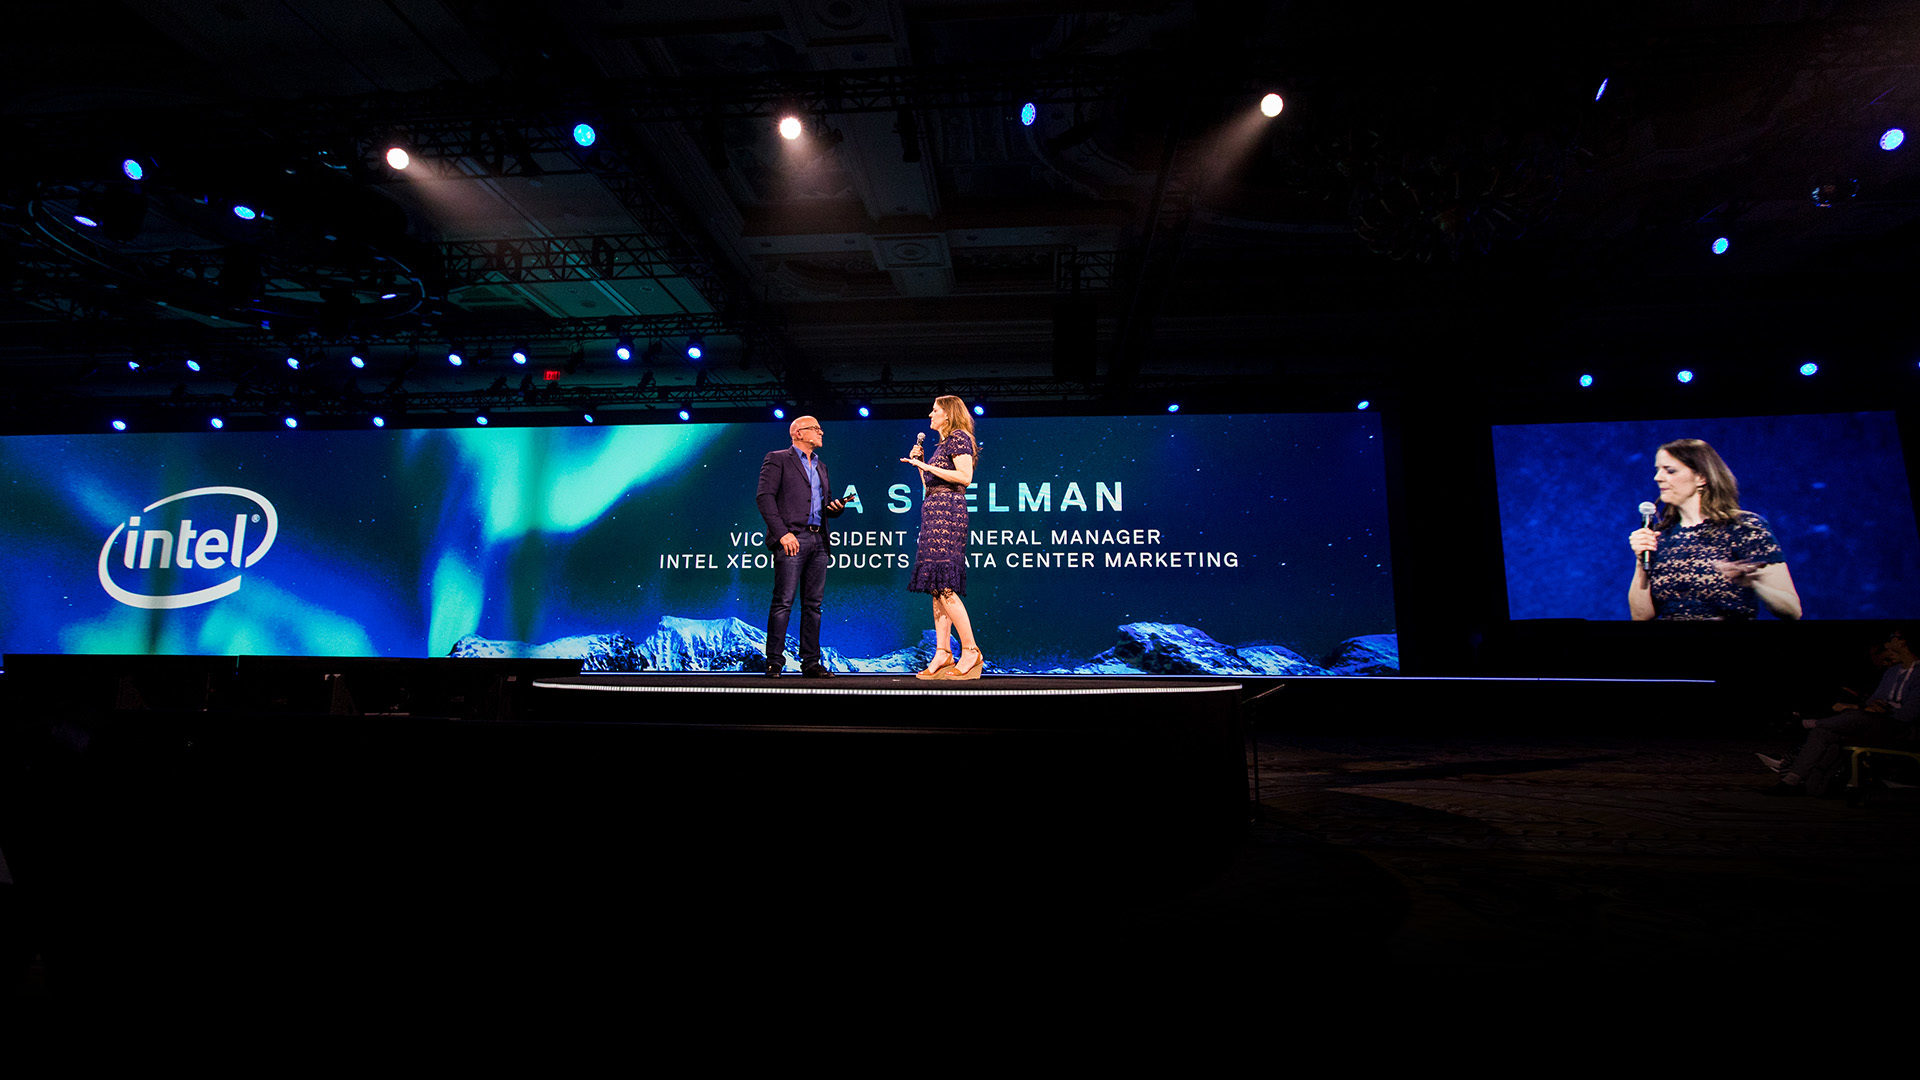 Two people speaking on the main stage in front of the large screen with graphics behind them.